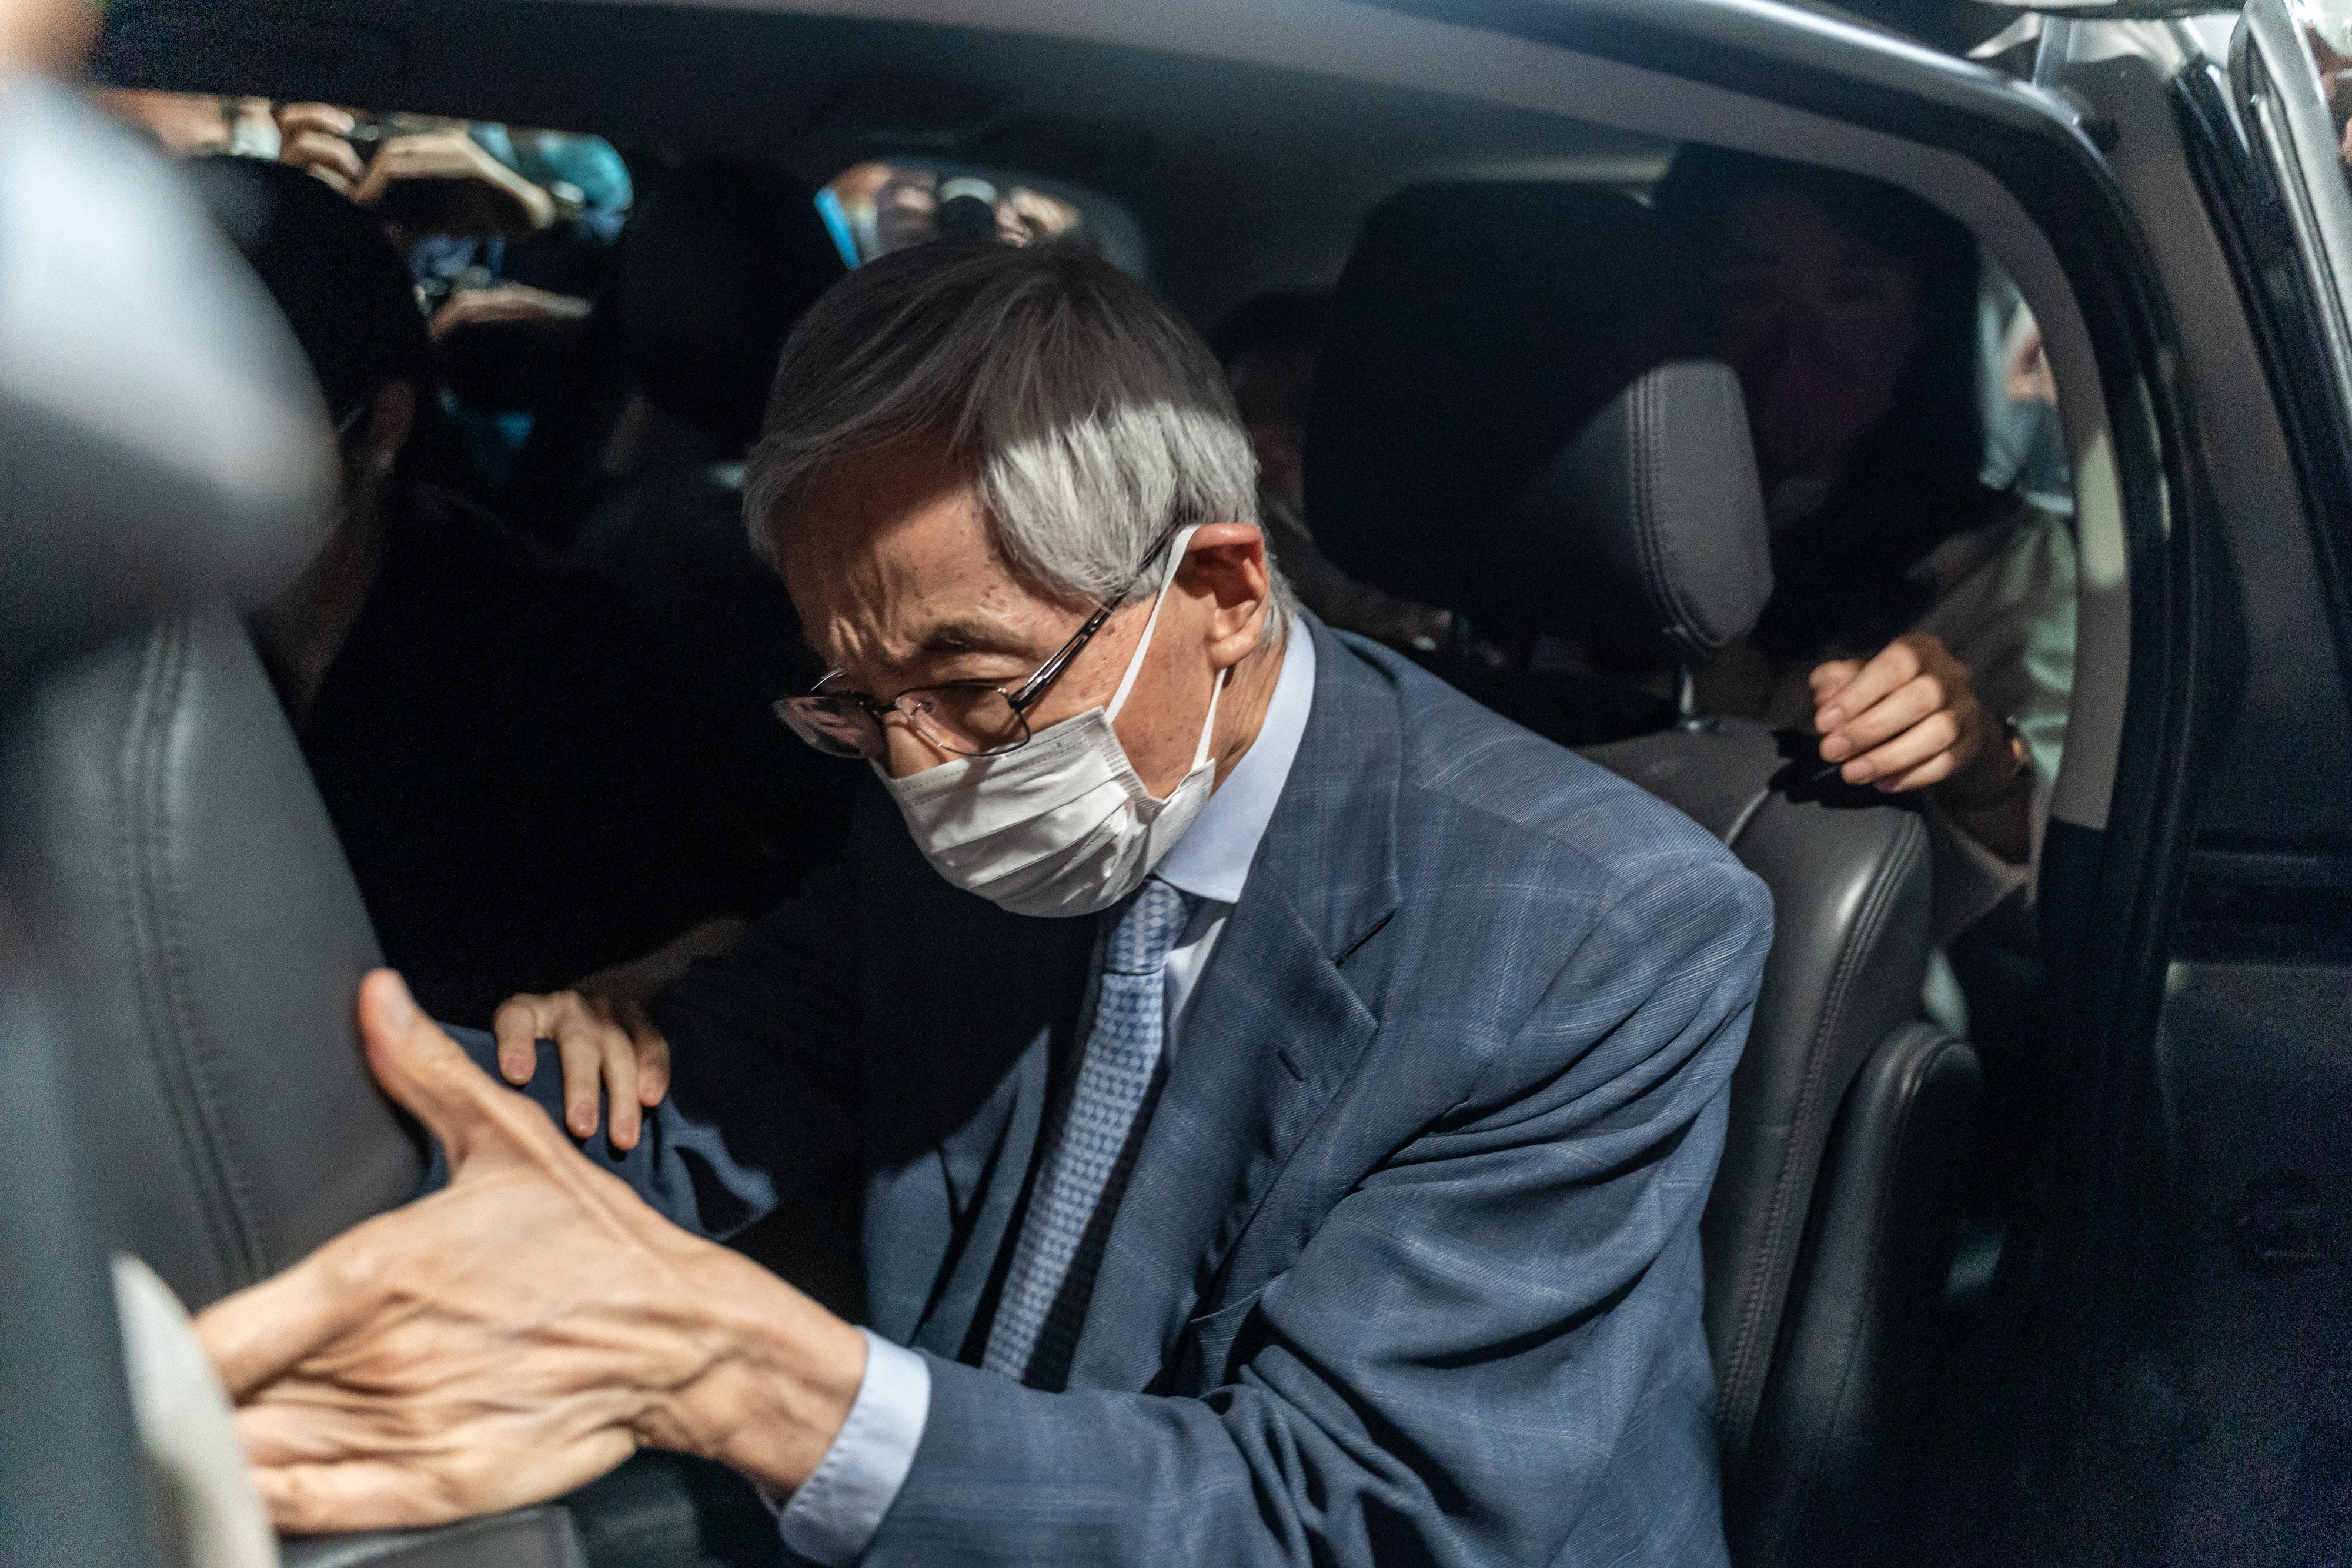 File image: Former lawmaker and barrister Martin Lee leaves West Kowloon court after being given a suspended sentence on 16 April, 2021 in Hong Kong . He was among the seven prominent democratic figures who were convicted of unauthorised assembly in relation to a peaceful protest in August 2019